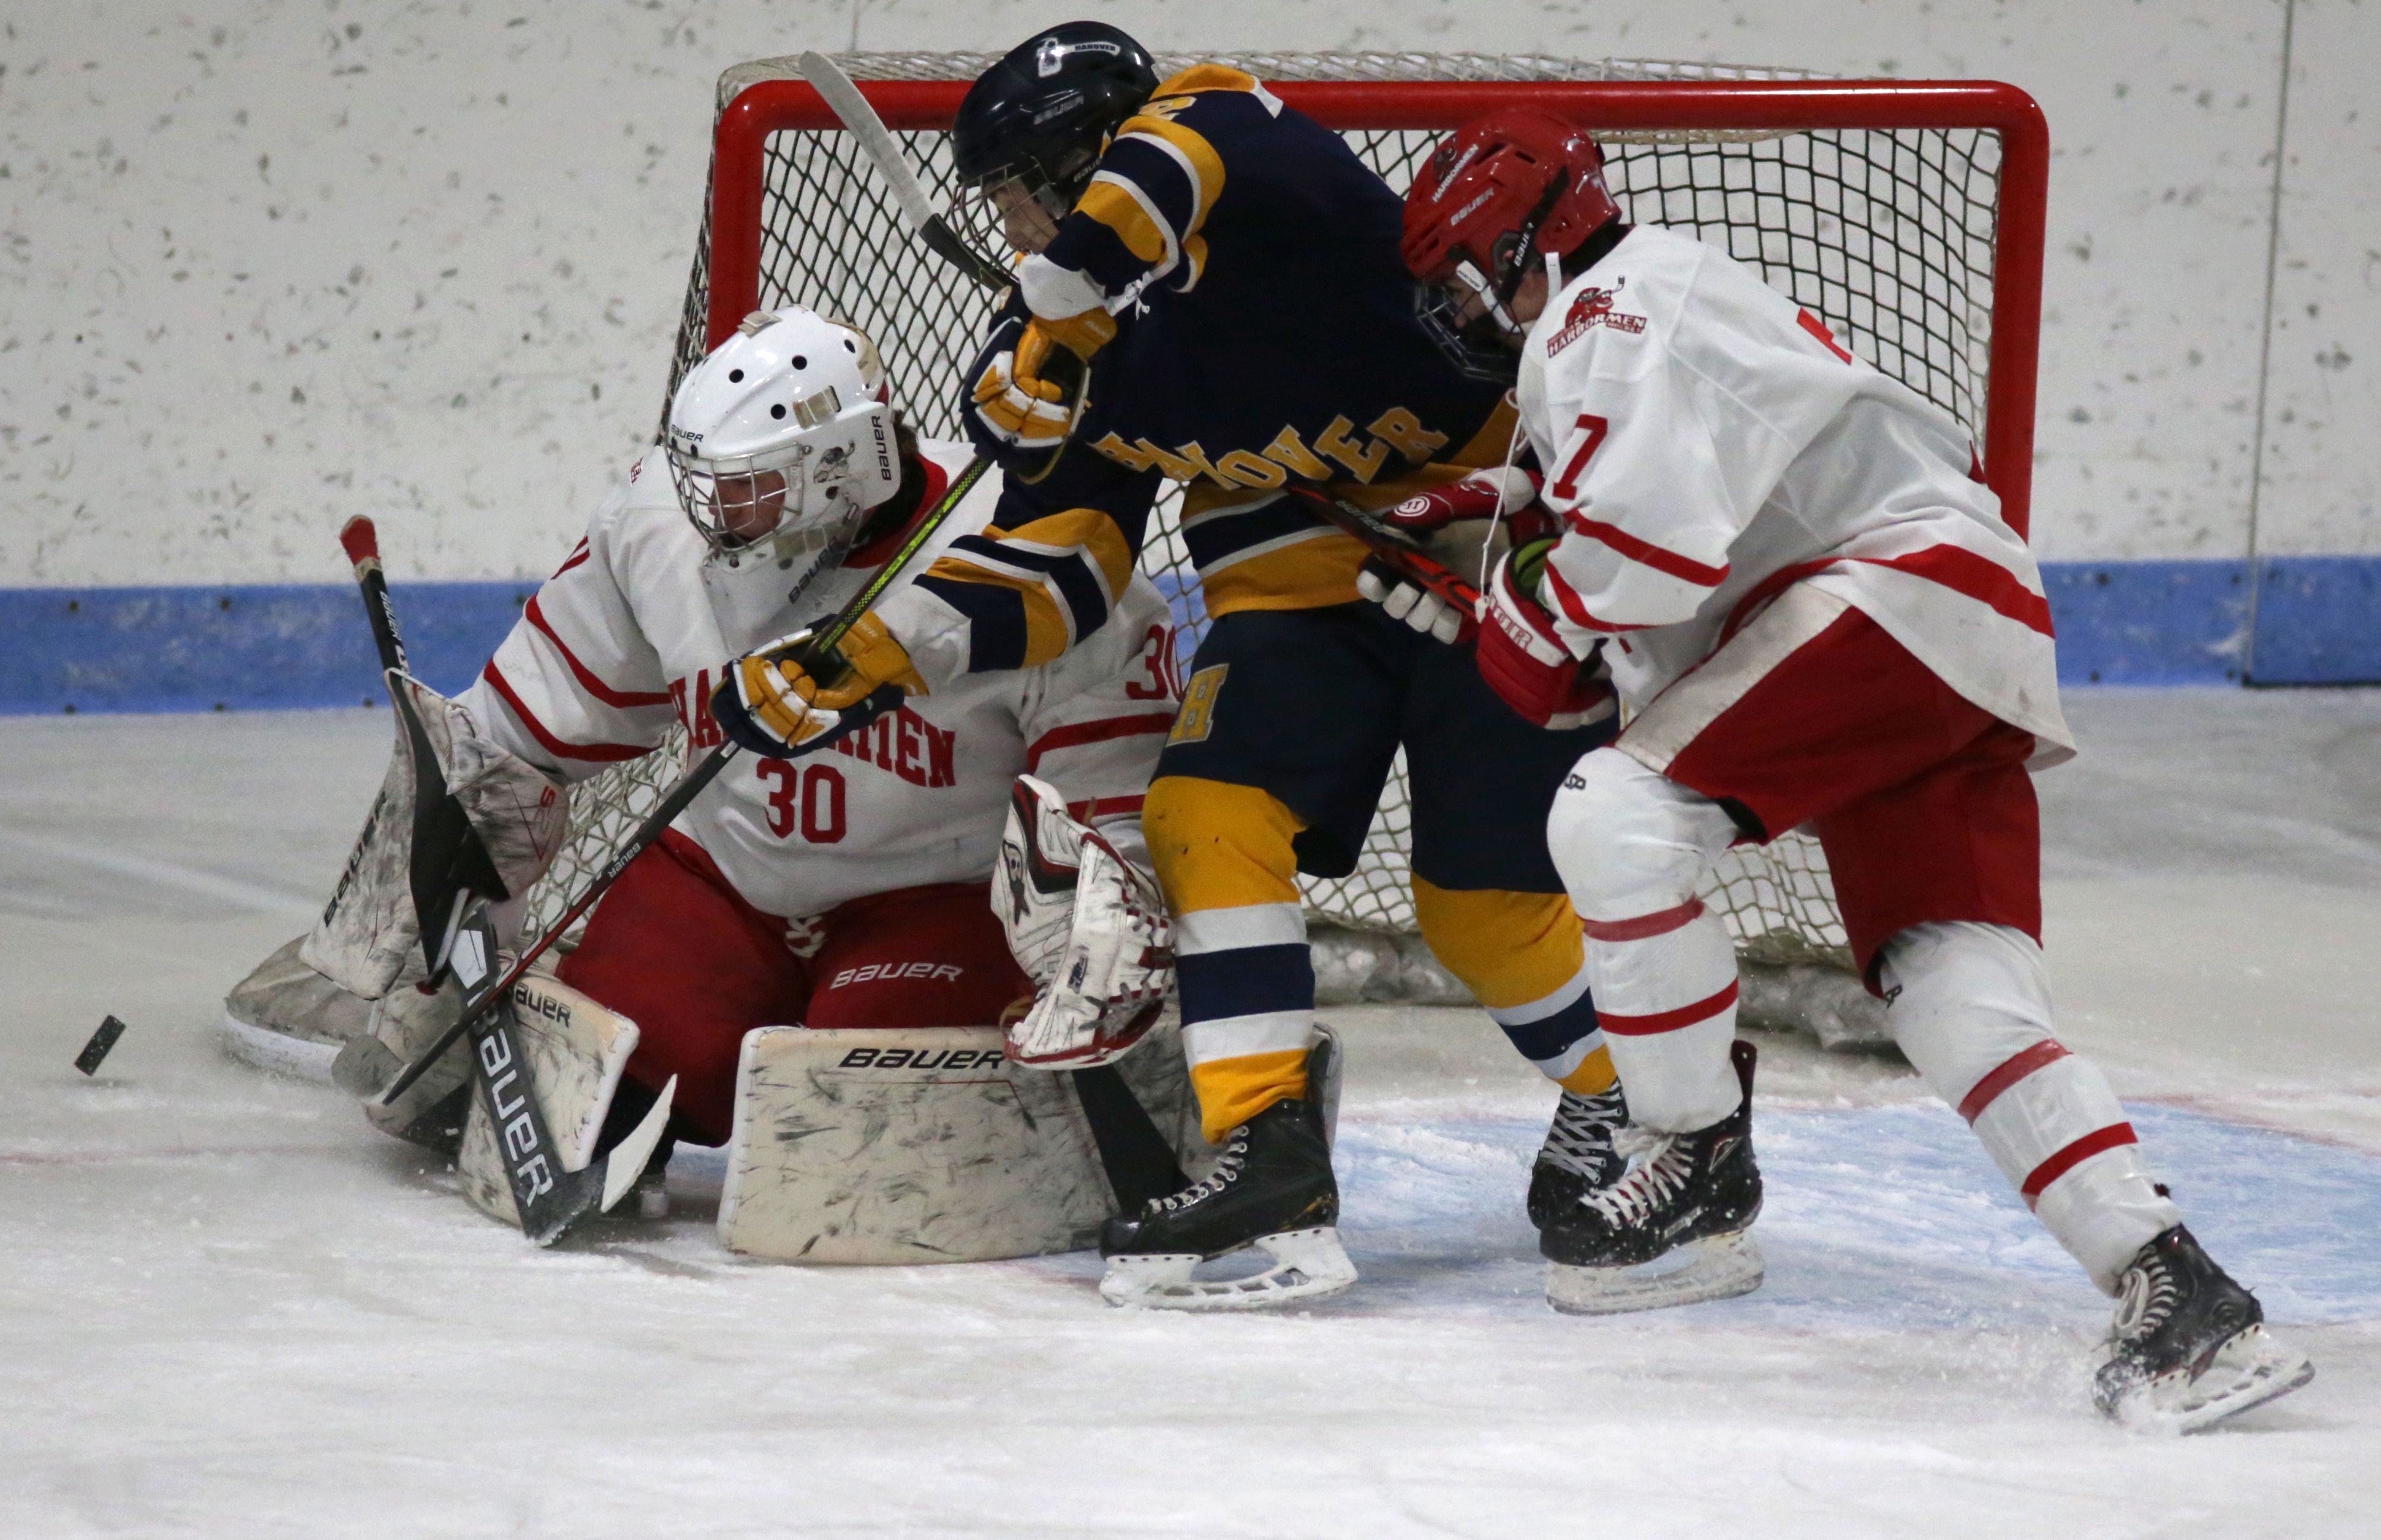 Dover beats Merrimack in Division II boys hockey state championship